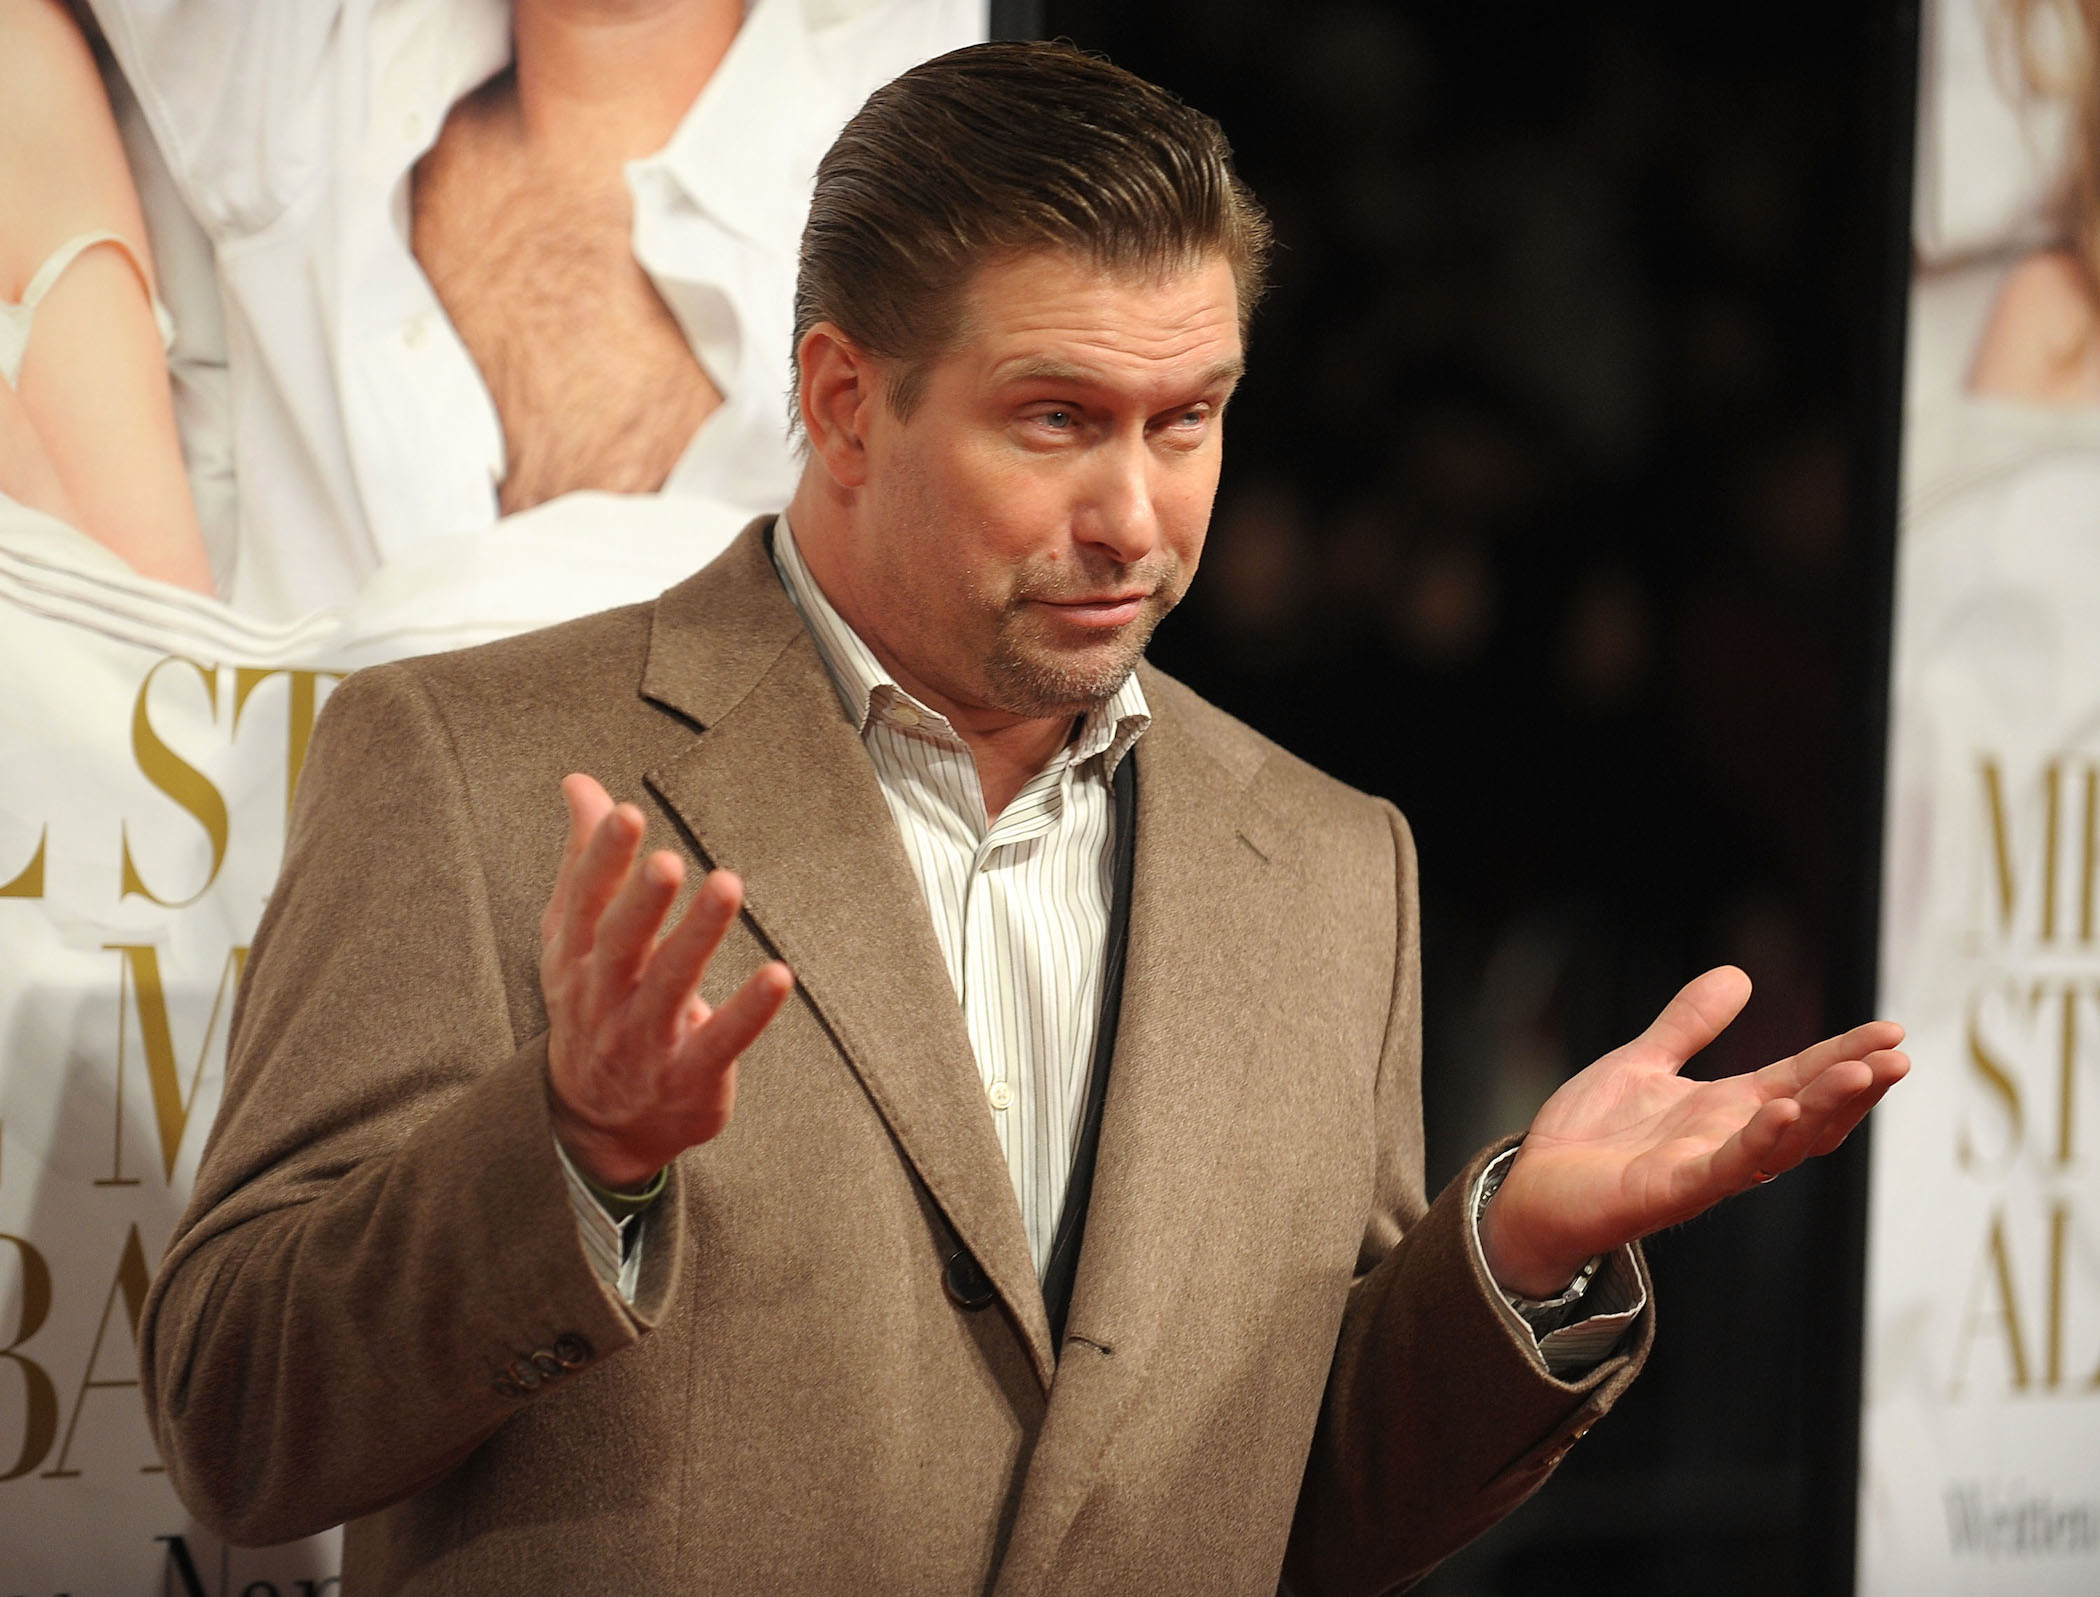 Stephen Baldwin Net Worth: Stephen Baldwin is an American actor, director, producer, and author who has a net worth of $1 million.